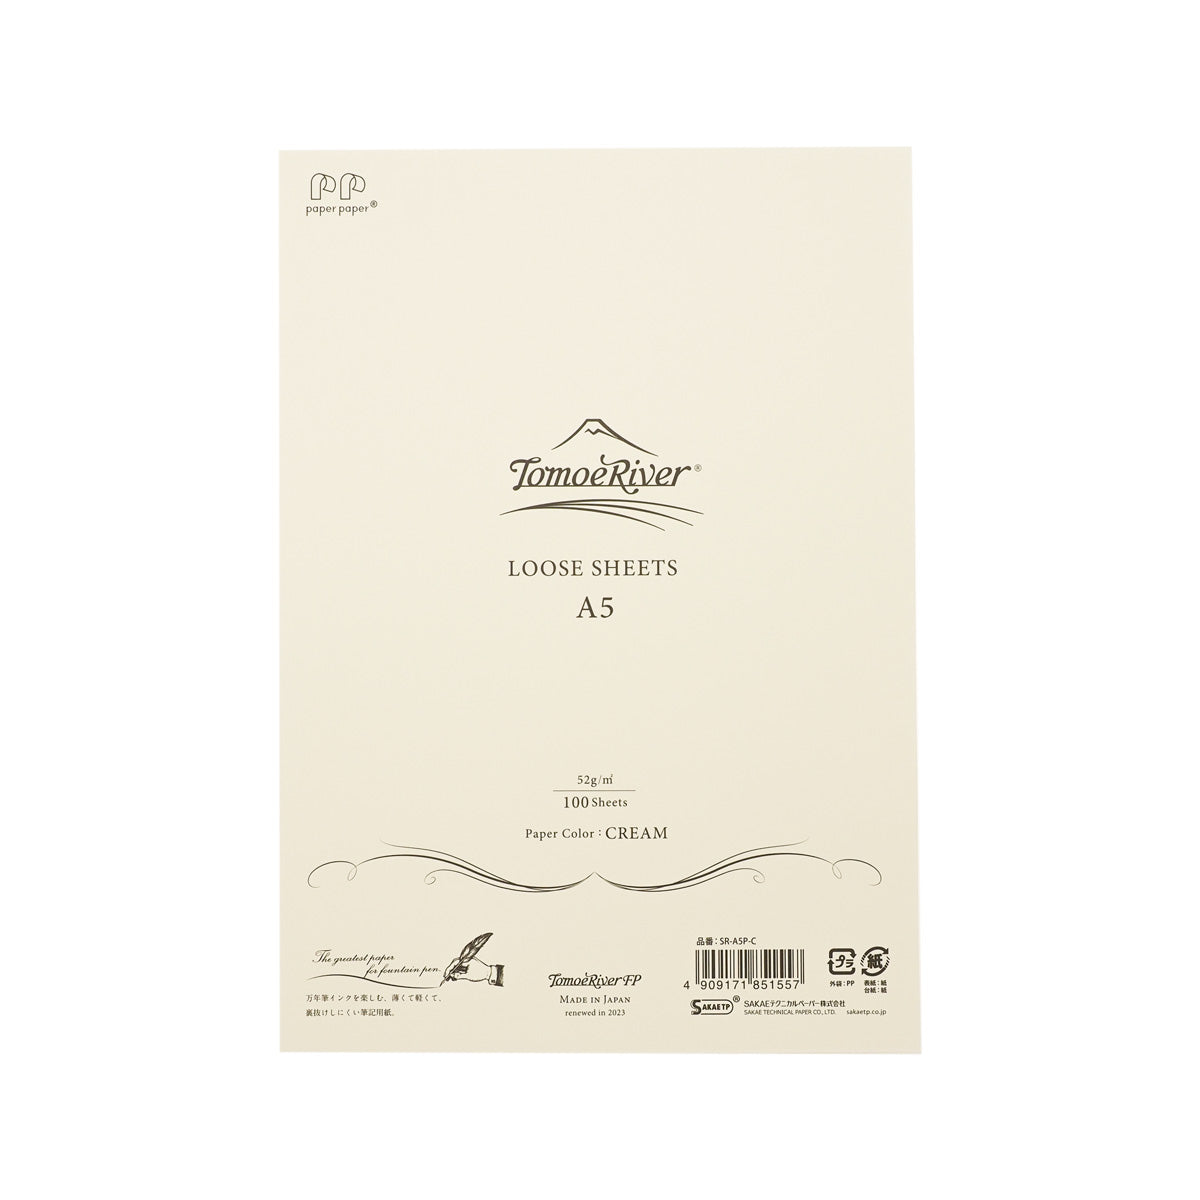 Tomoe River paper: DIN A5 loose sheets cream-colored